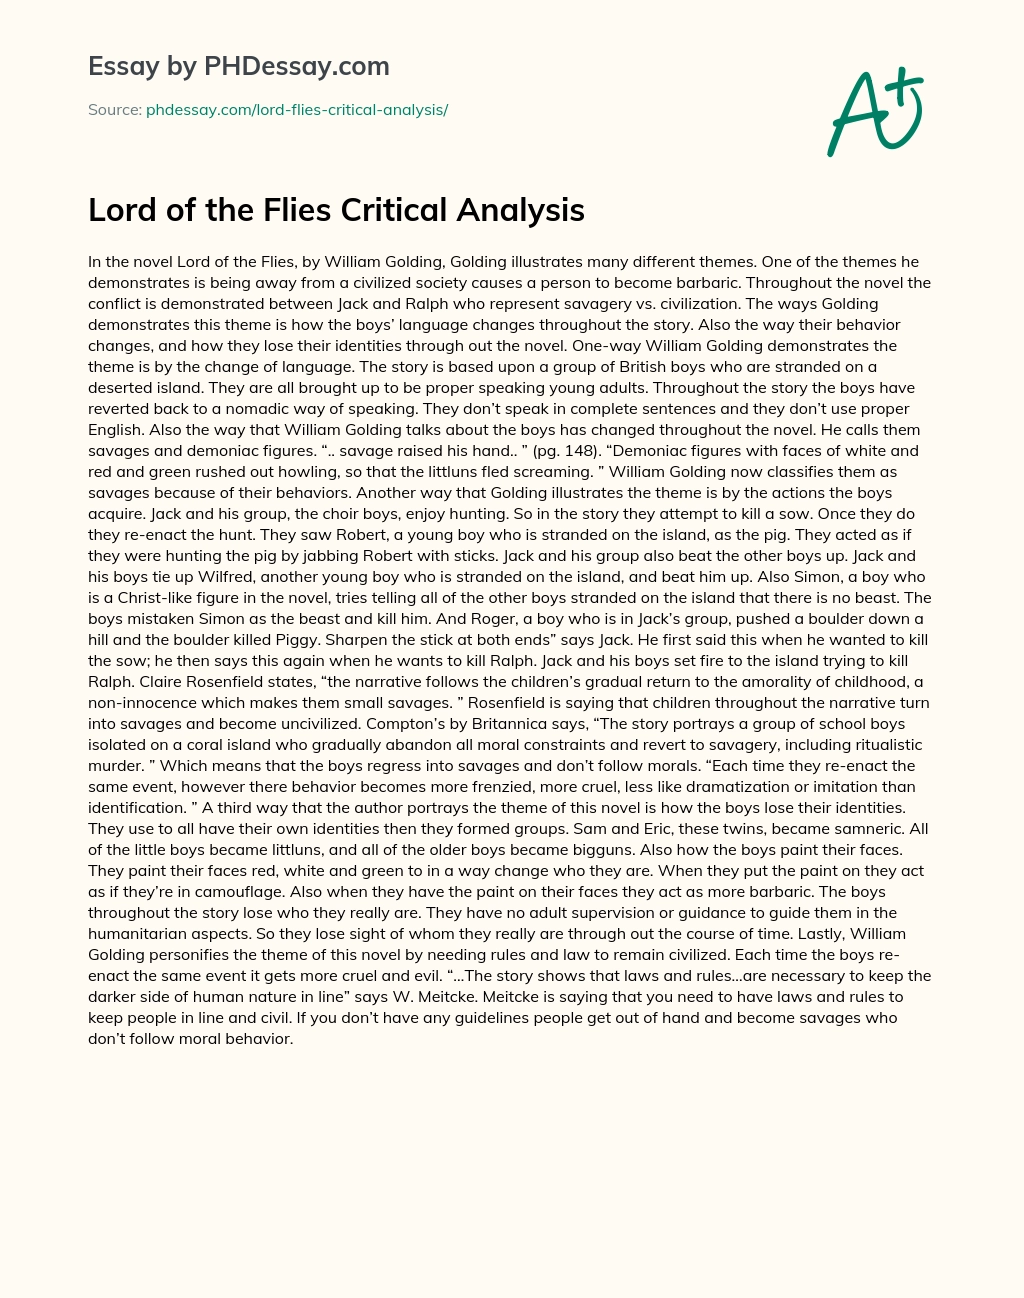 Lord of the Flies Critical Analysis essay